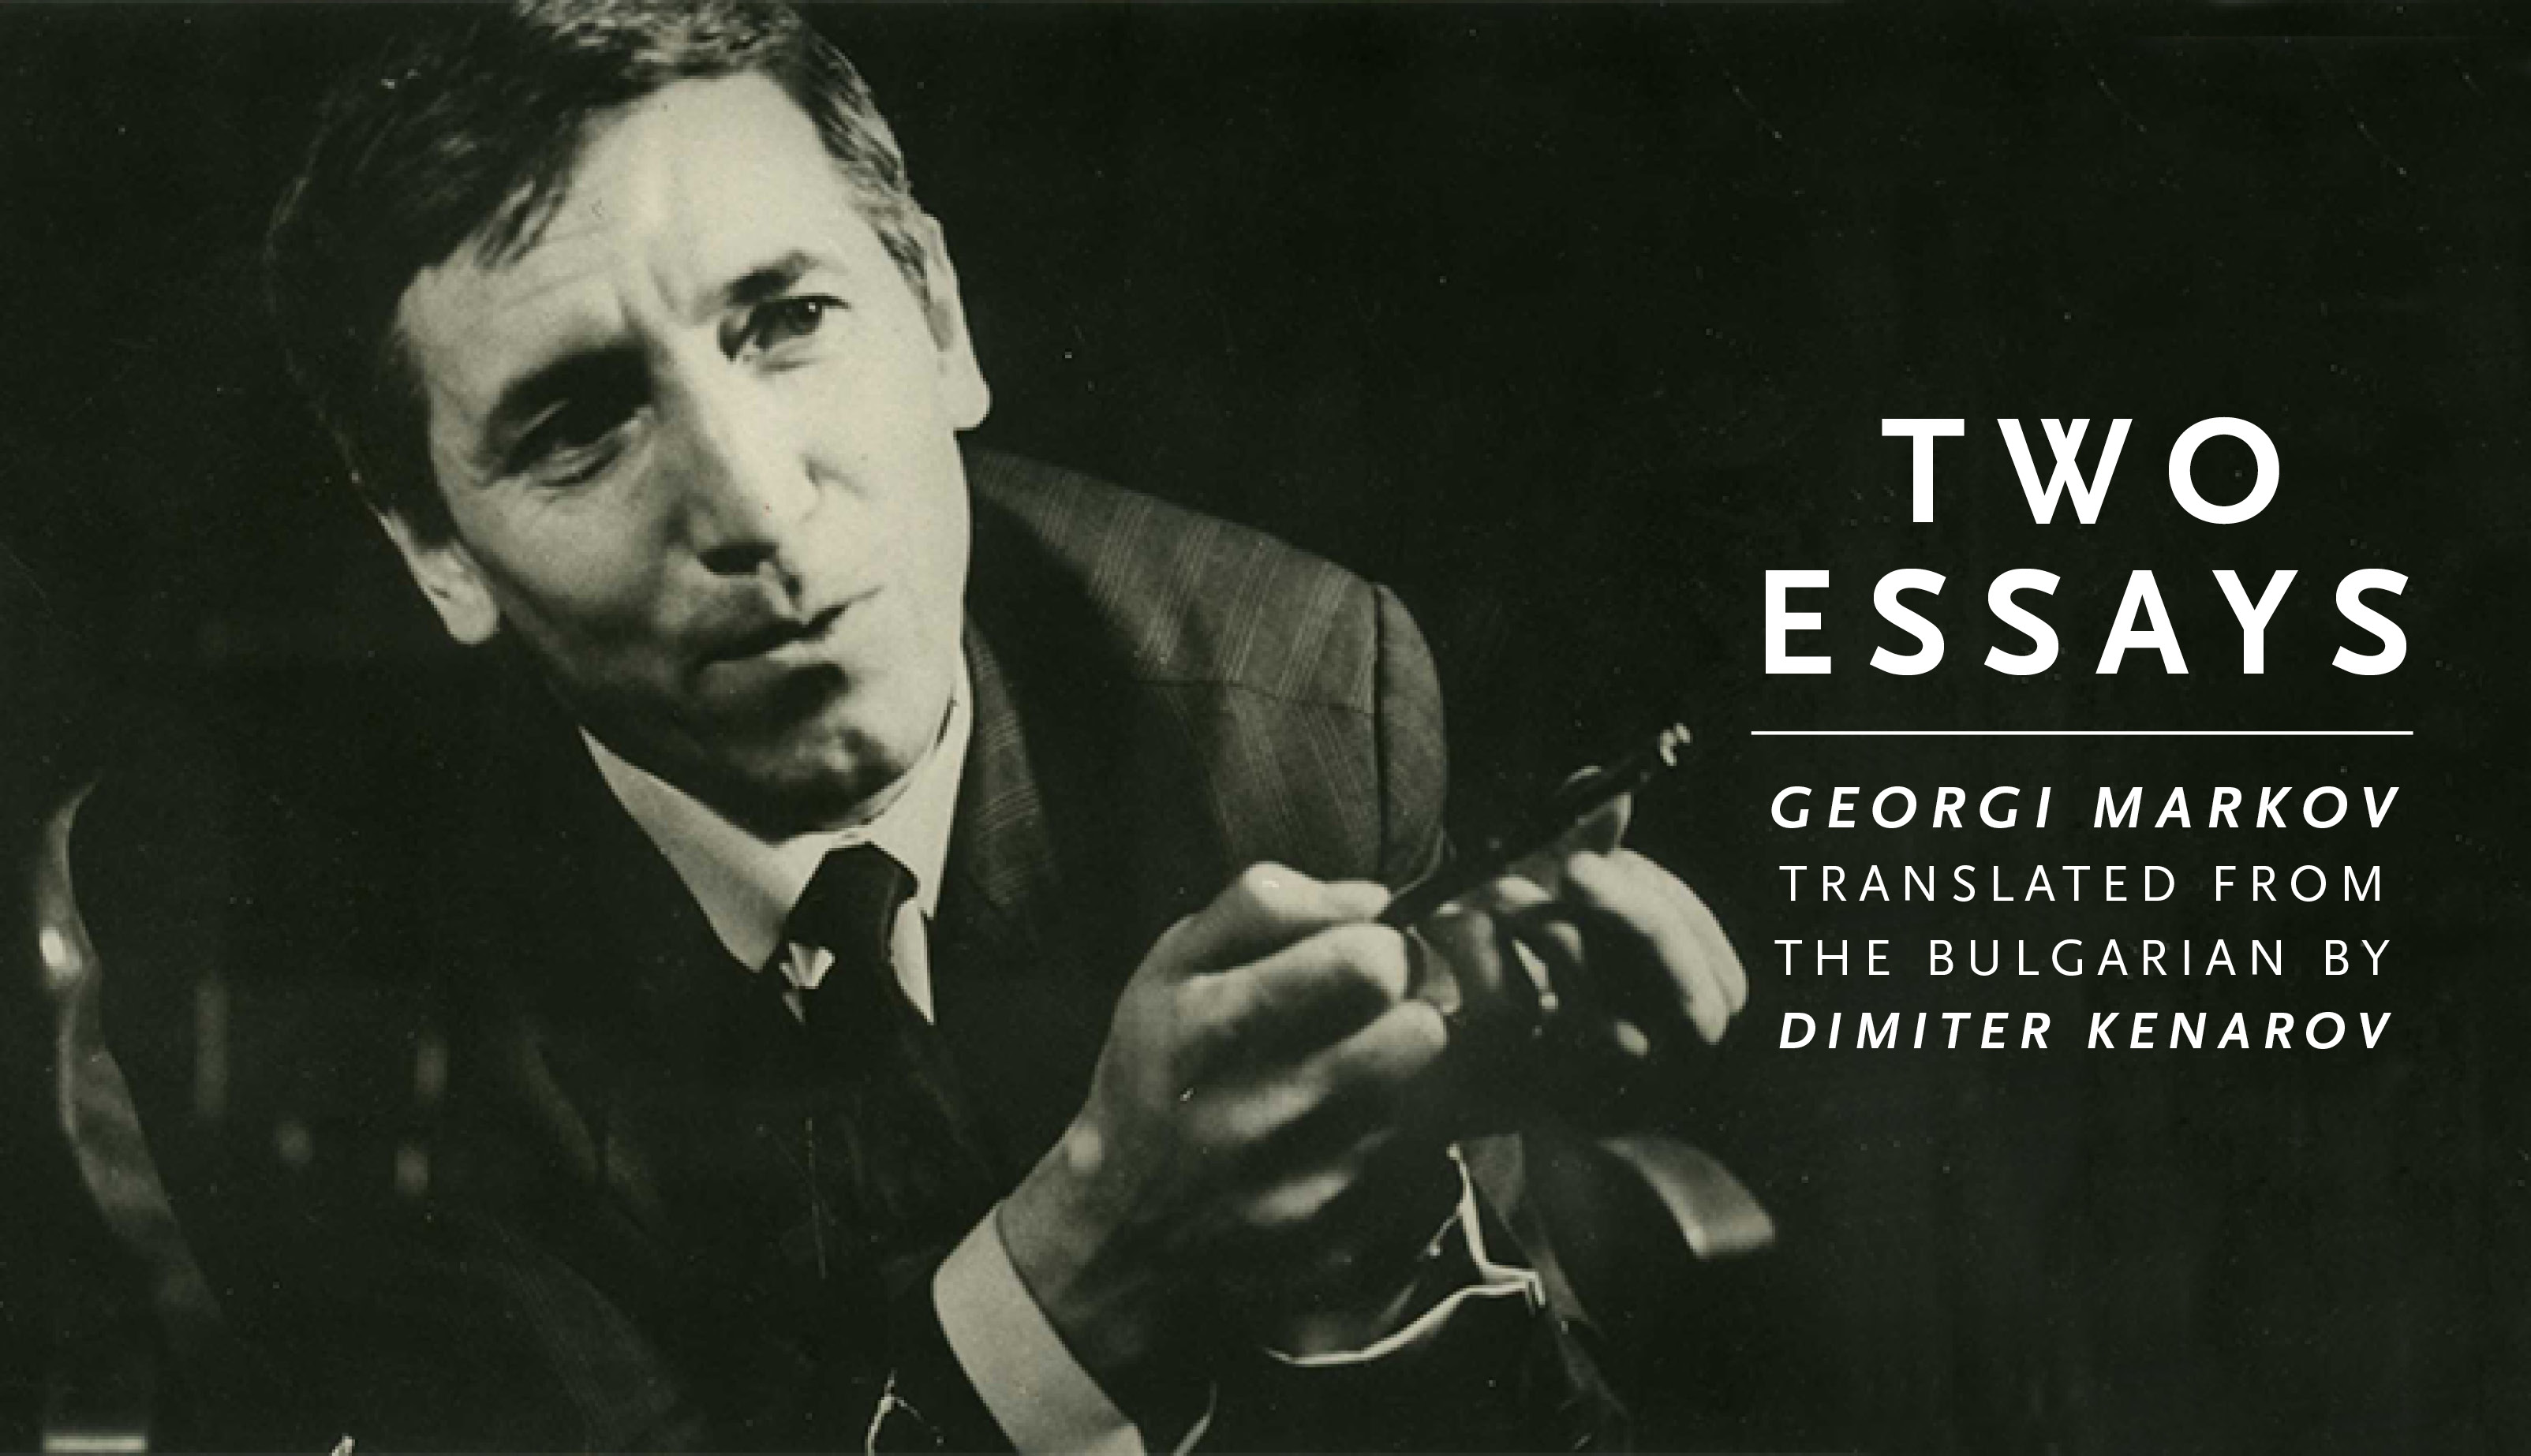 Black and white image of a man with the text: "'Two Essays' by Georgi Markov, translated from the Bulgarian by Dimiter Kenarov"